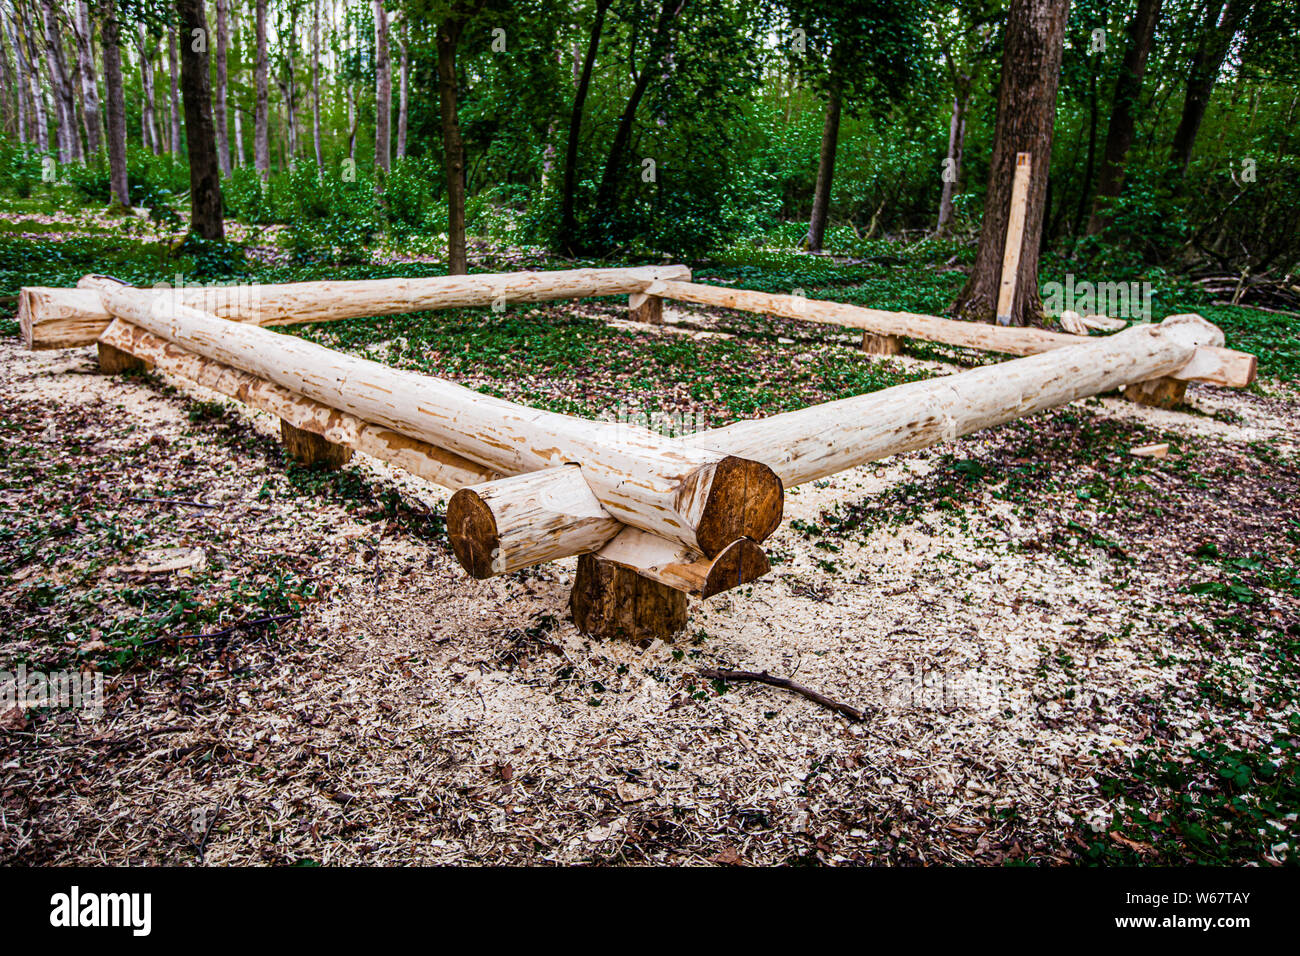 Building a log house with chainsaw and traditional carpenter tools in Grevenbroich, Germany Stock Photo